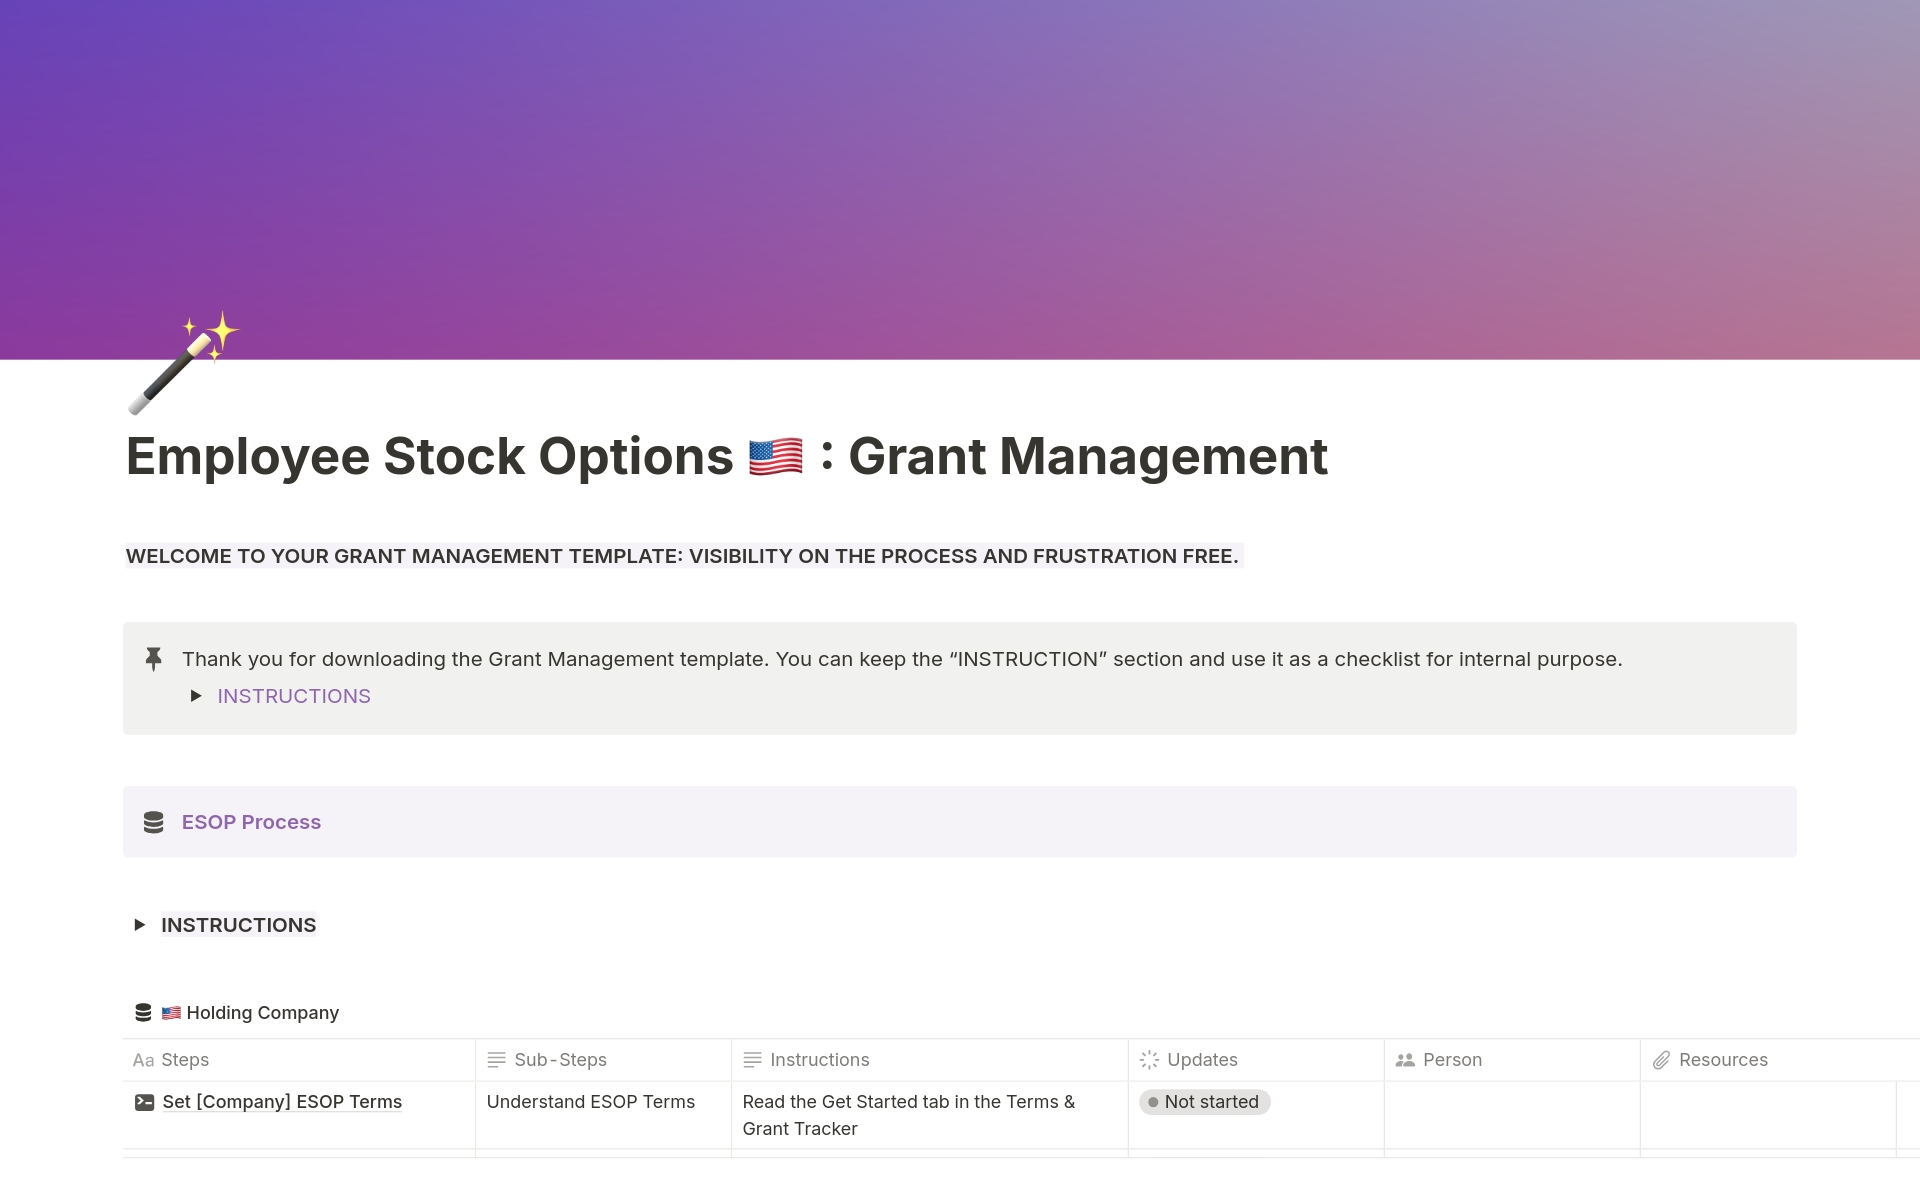 No more headaches about stock options grants! The equity grant management template streamlines everything for you in the workspace you love. Combines +10 of VC experience.